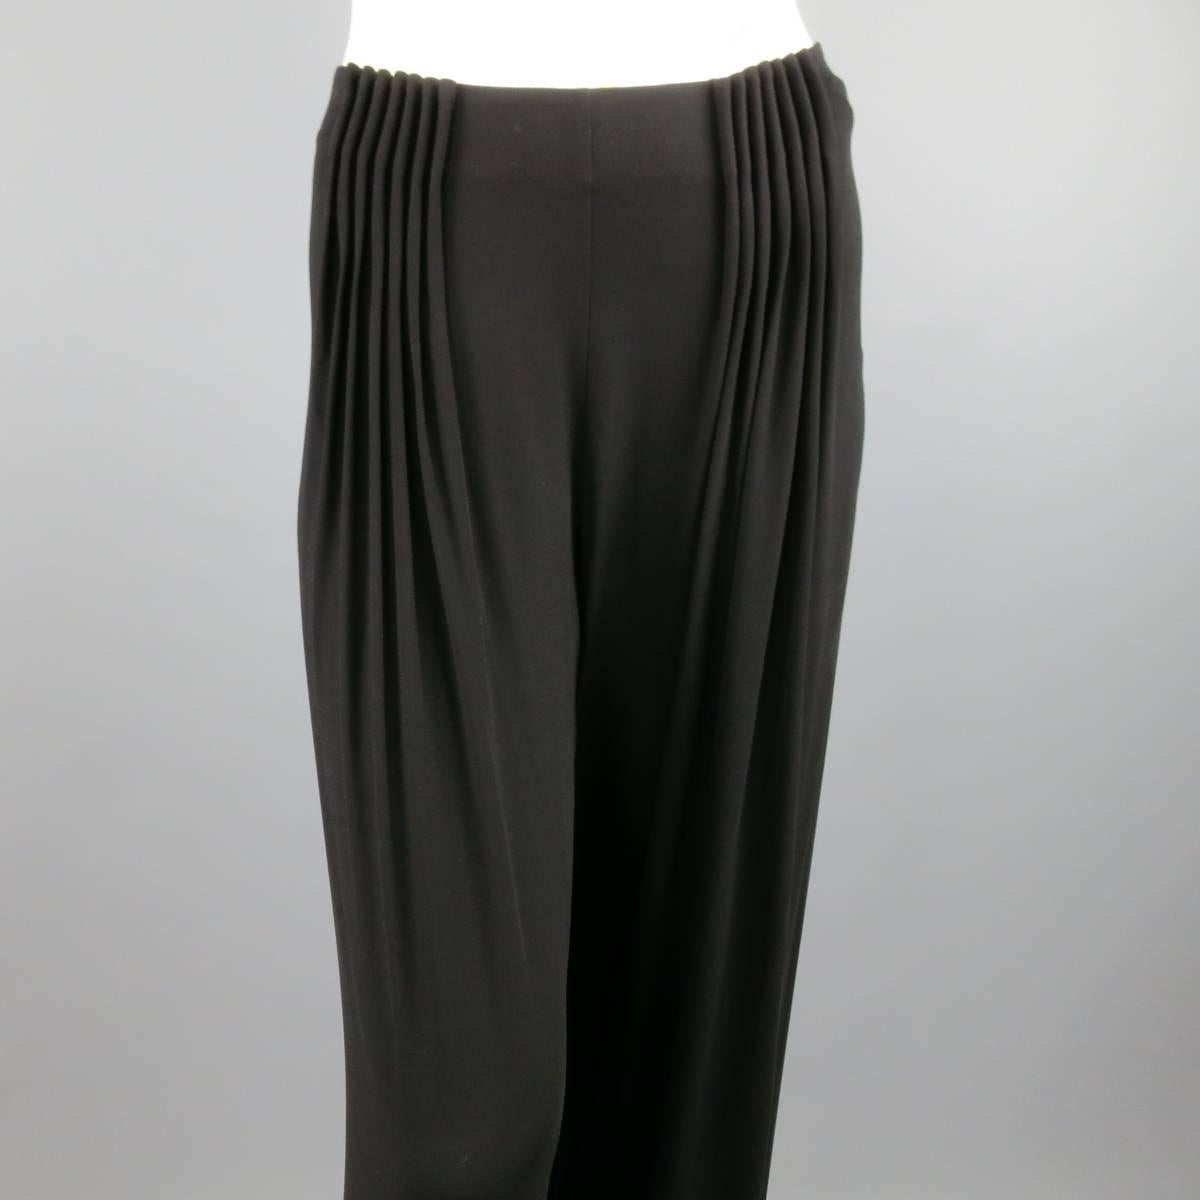 FENDI black rayon dress pants feature a wide leg with gathered pleats in the front with side zipper and hook and eye closure. Made in Italy.
Excellent Pre-Owned Condition.
Marked: 40
 
Measurements:
Waist: 32 In.
Rise: 9.5 In.
Inseam: 34 In.
